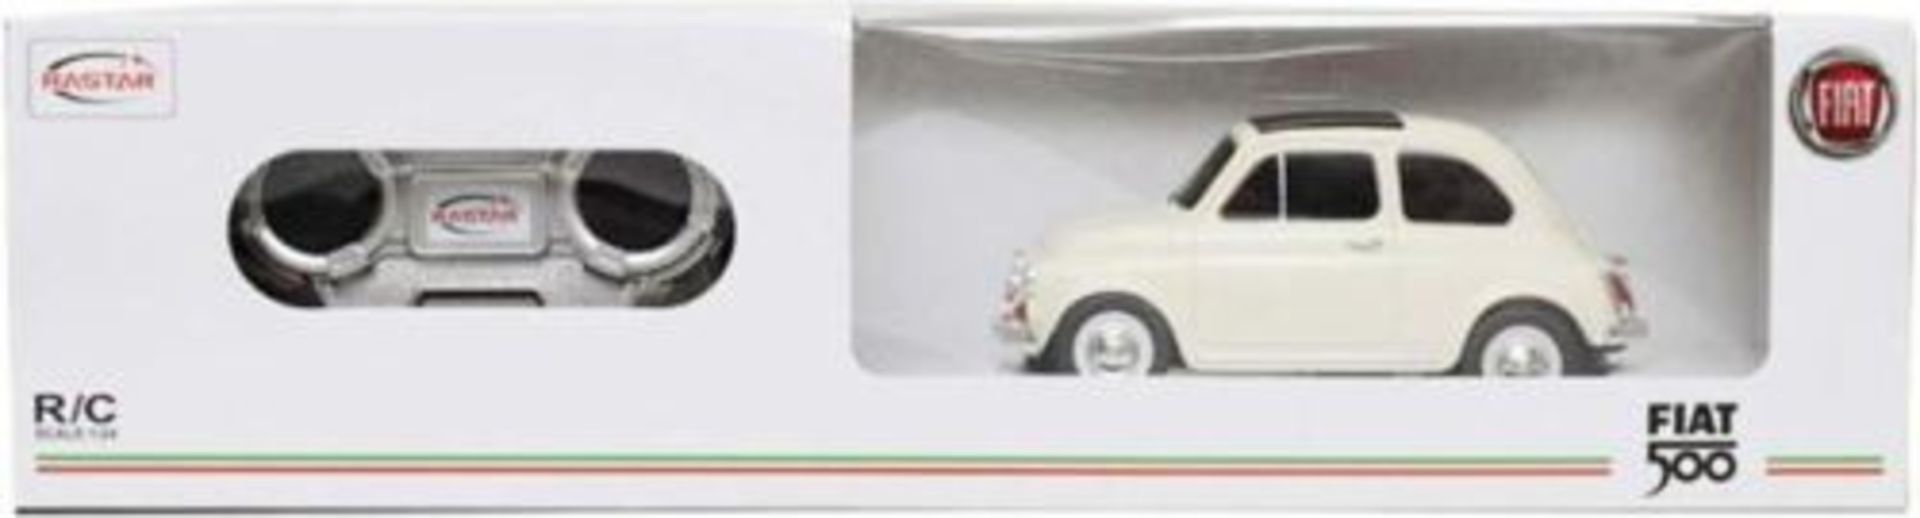 V *TRADE QTY* Brand New 1:24 Scale Radio Control Fiat 500 - Fully Licensed X 10 YOUR BID PRICE TO BE